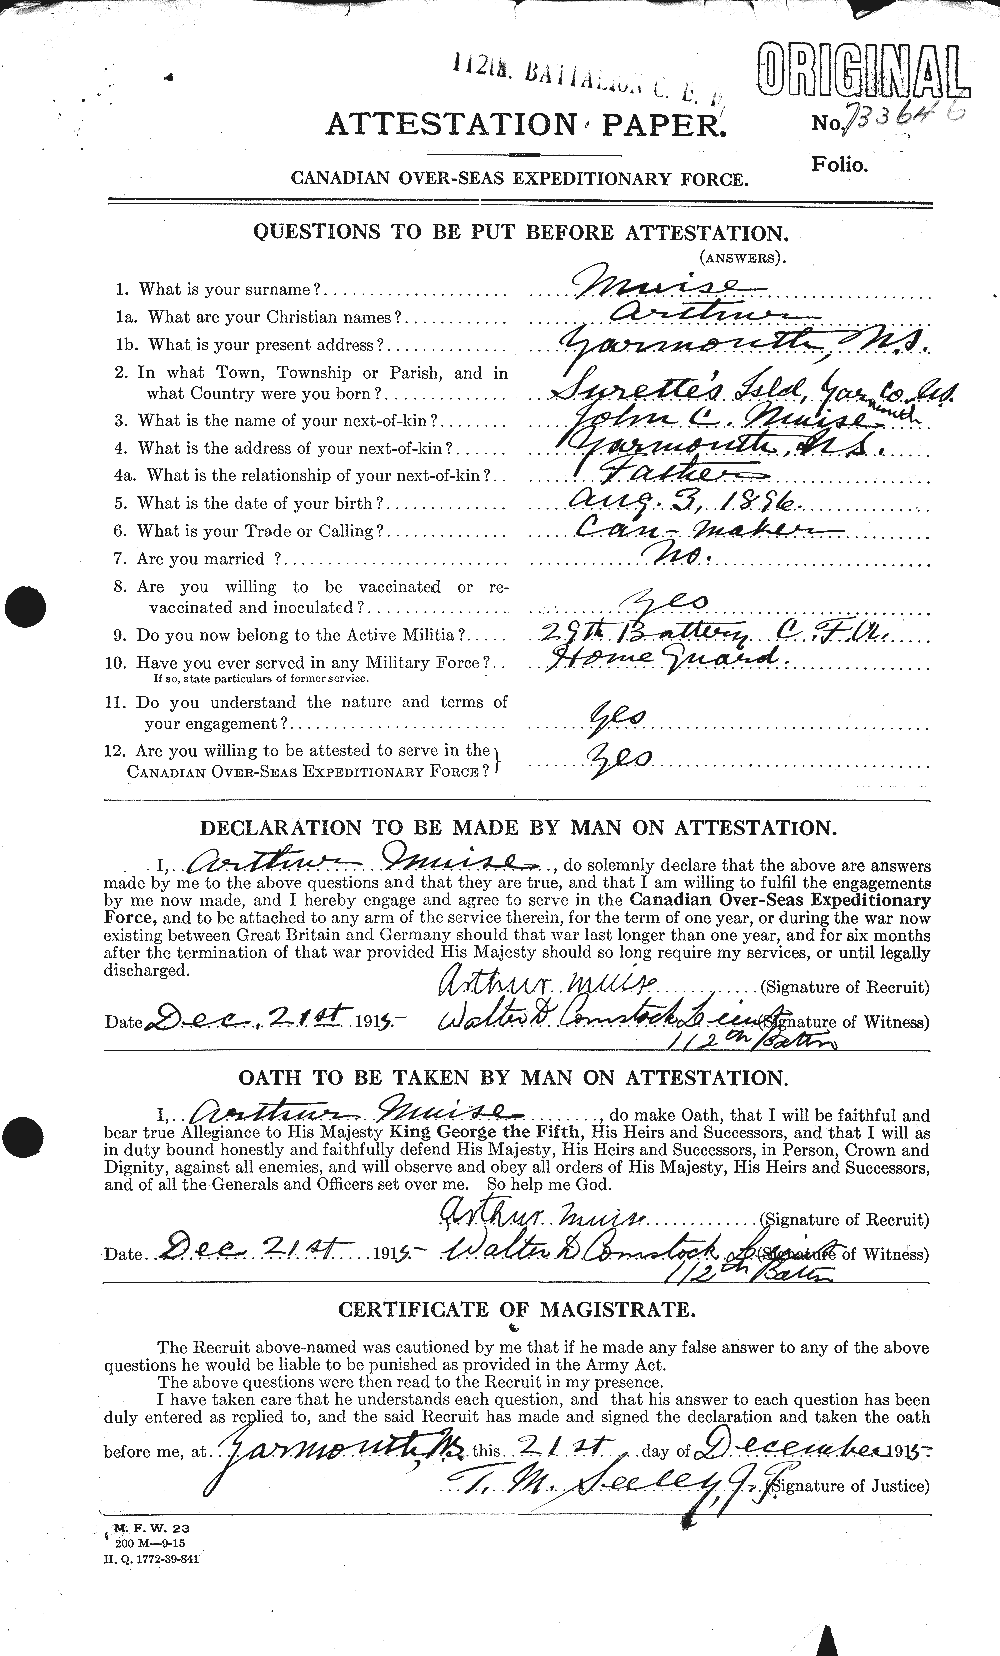 Personnel Records of the First World War - CEF 511349a